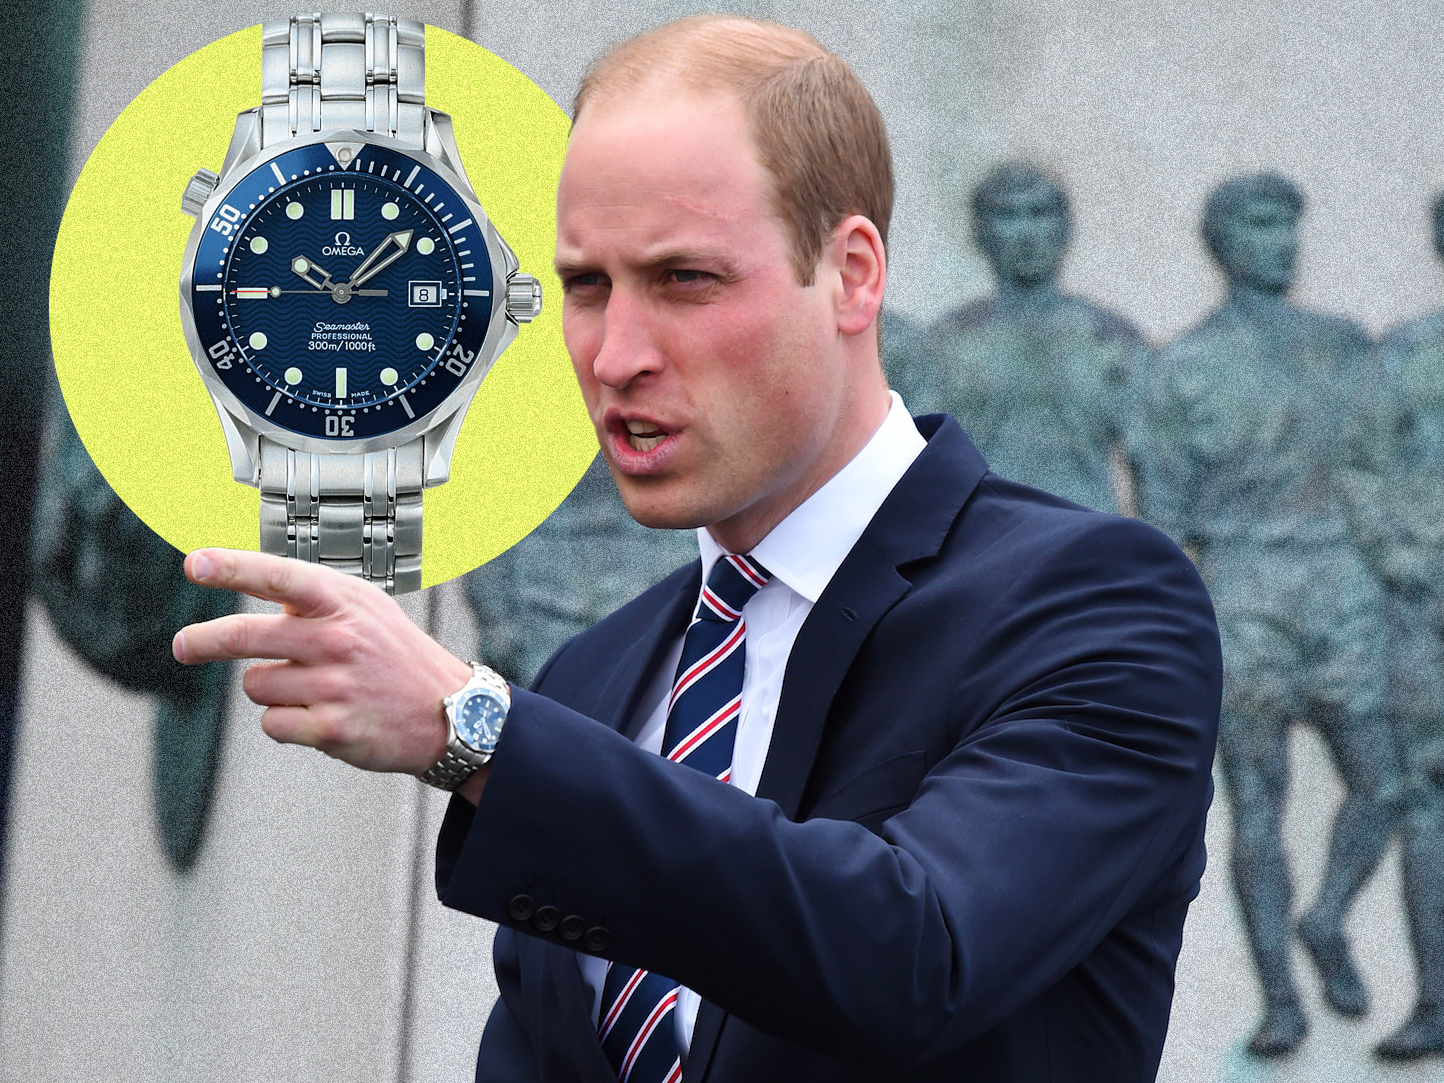 Prince William’s Watch Has Been On His Wrist For 30 Years